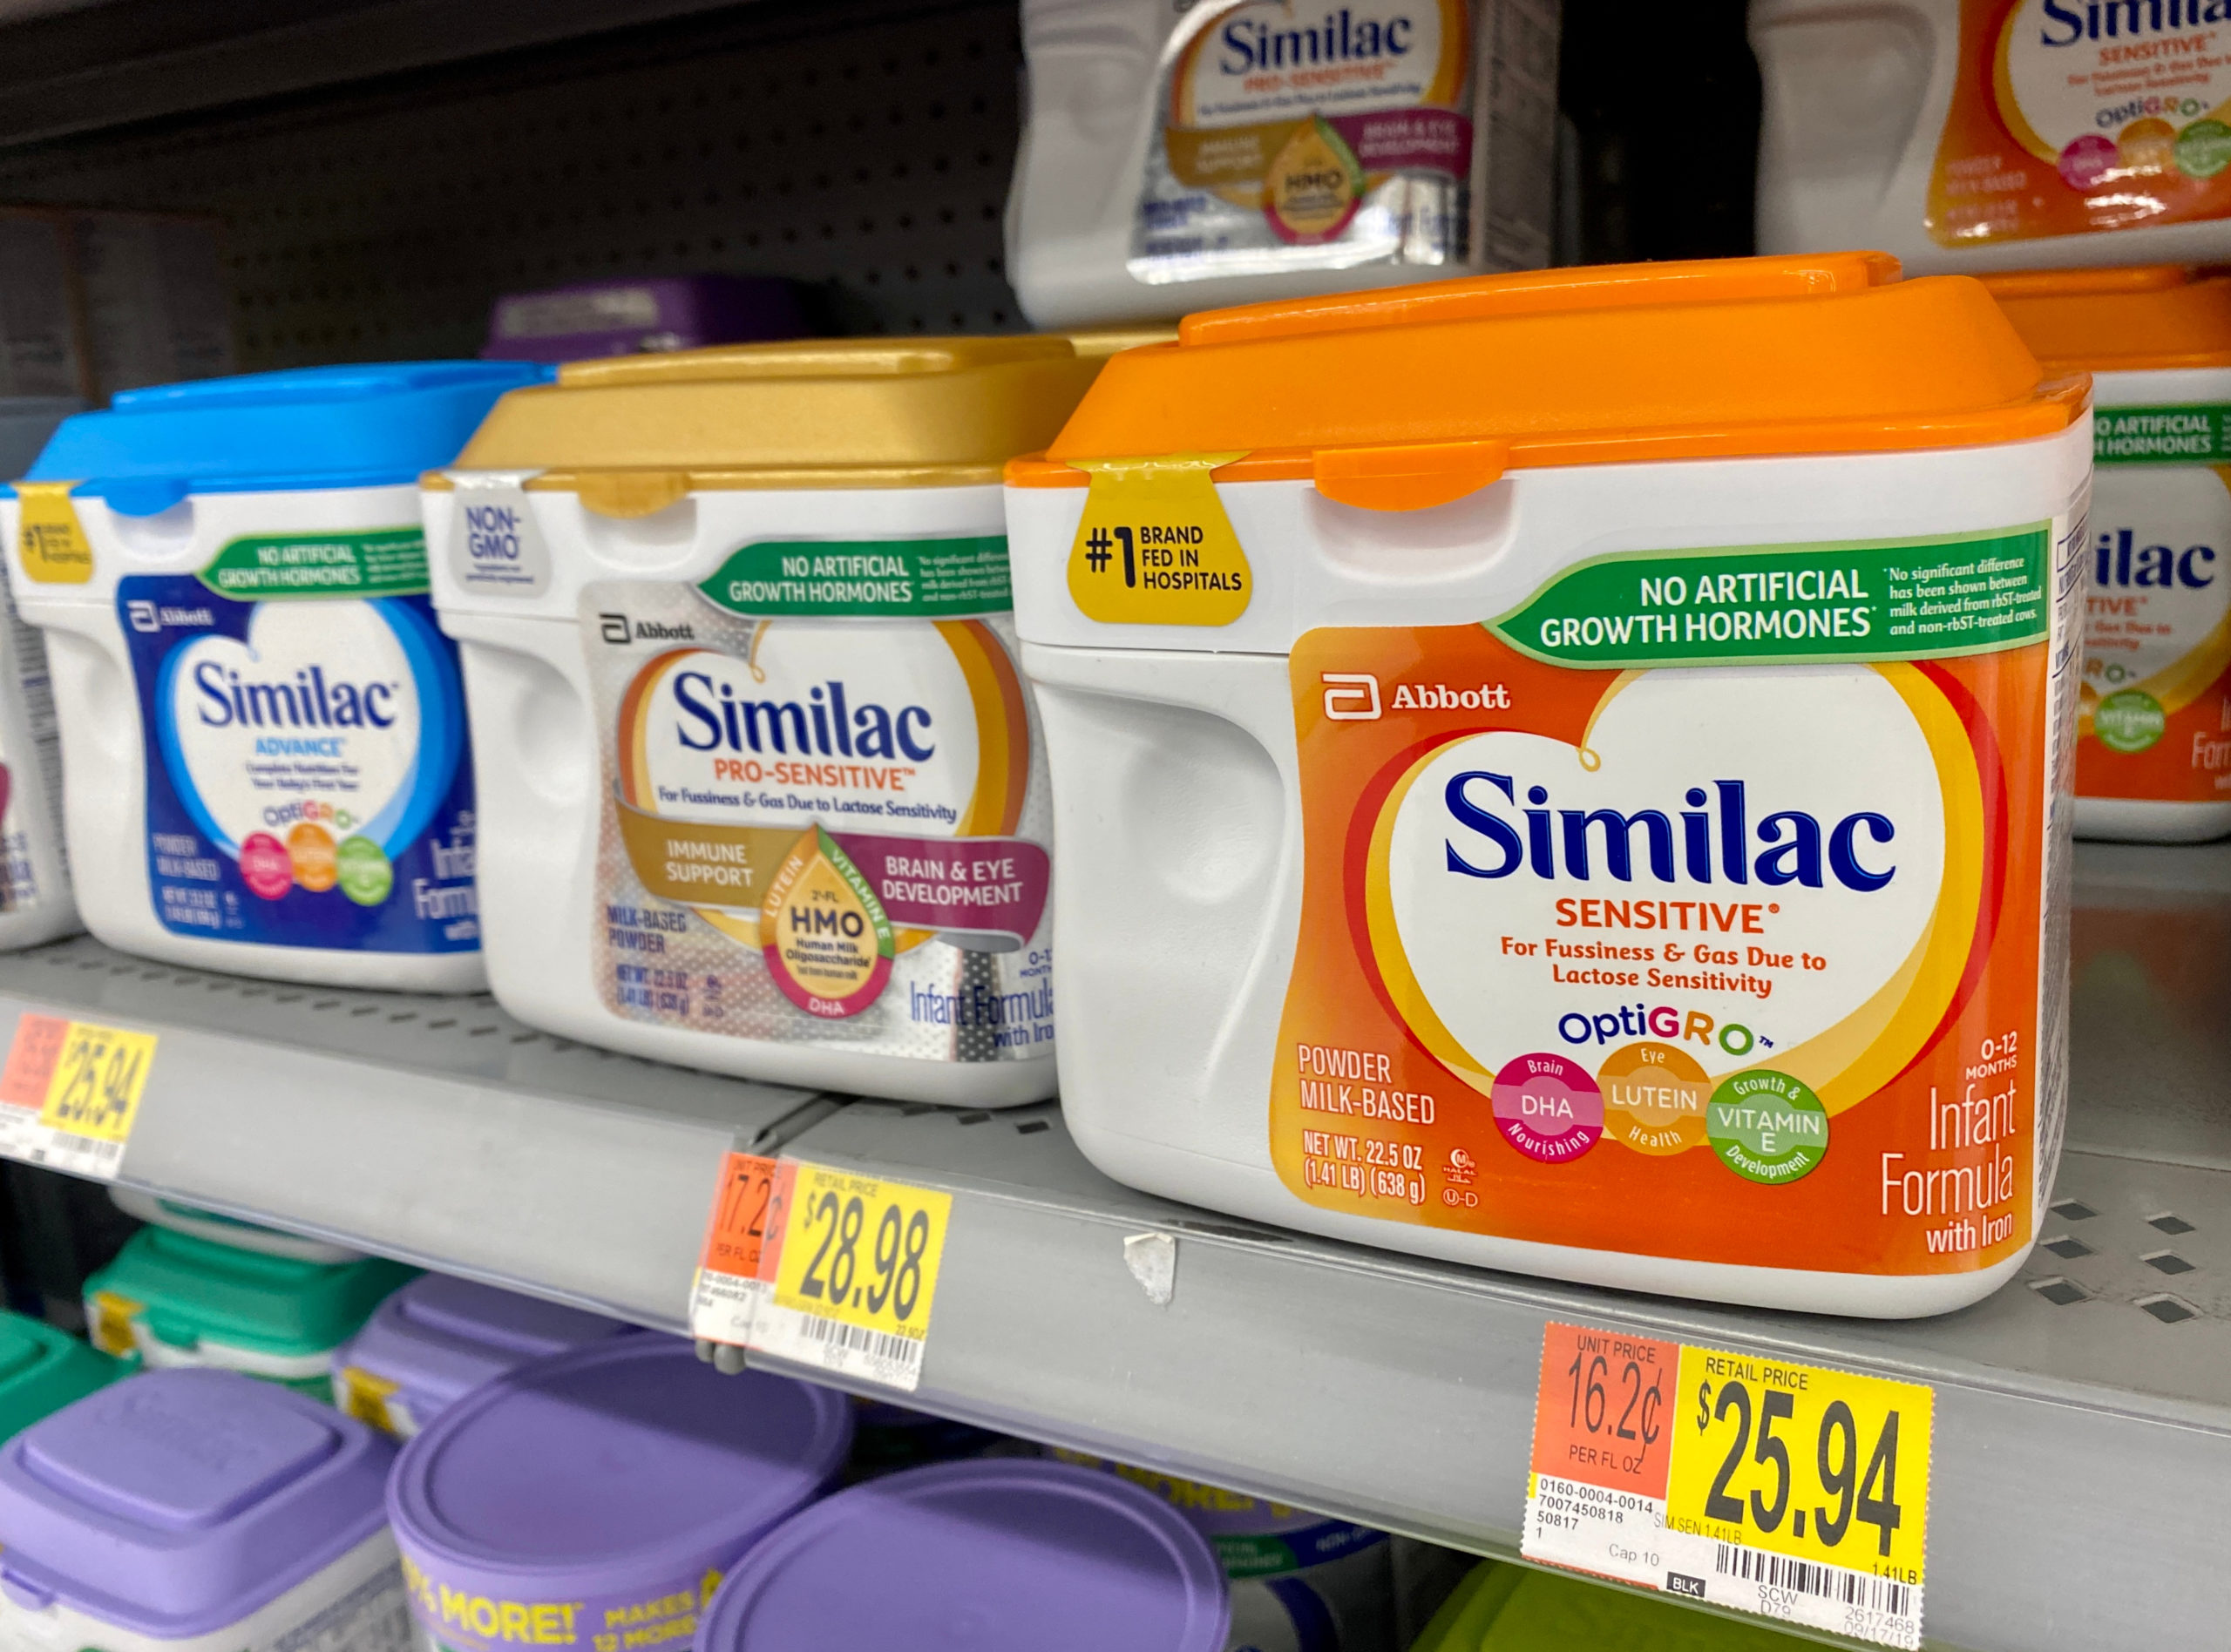 Recall of Similac Infant Formula Leads to Senate Inquiry and Contamination Lawsuits Against